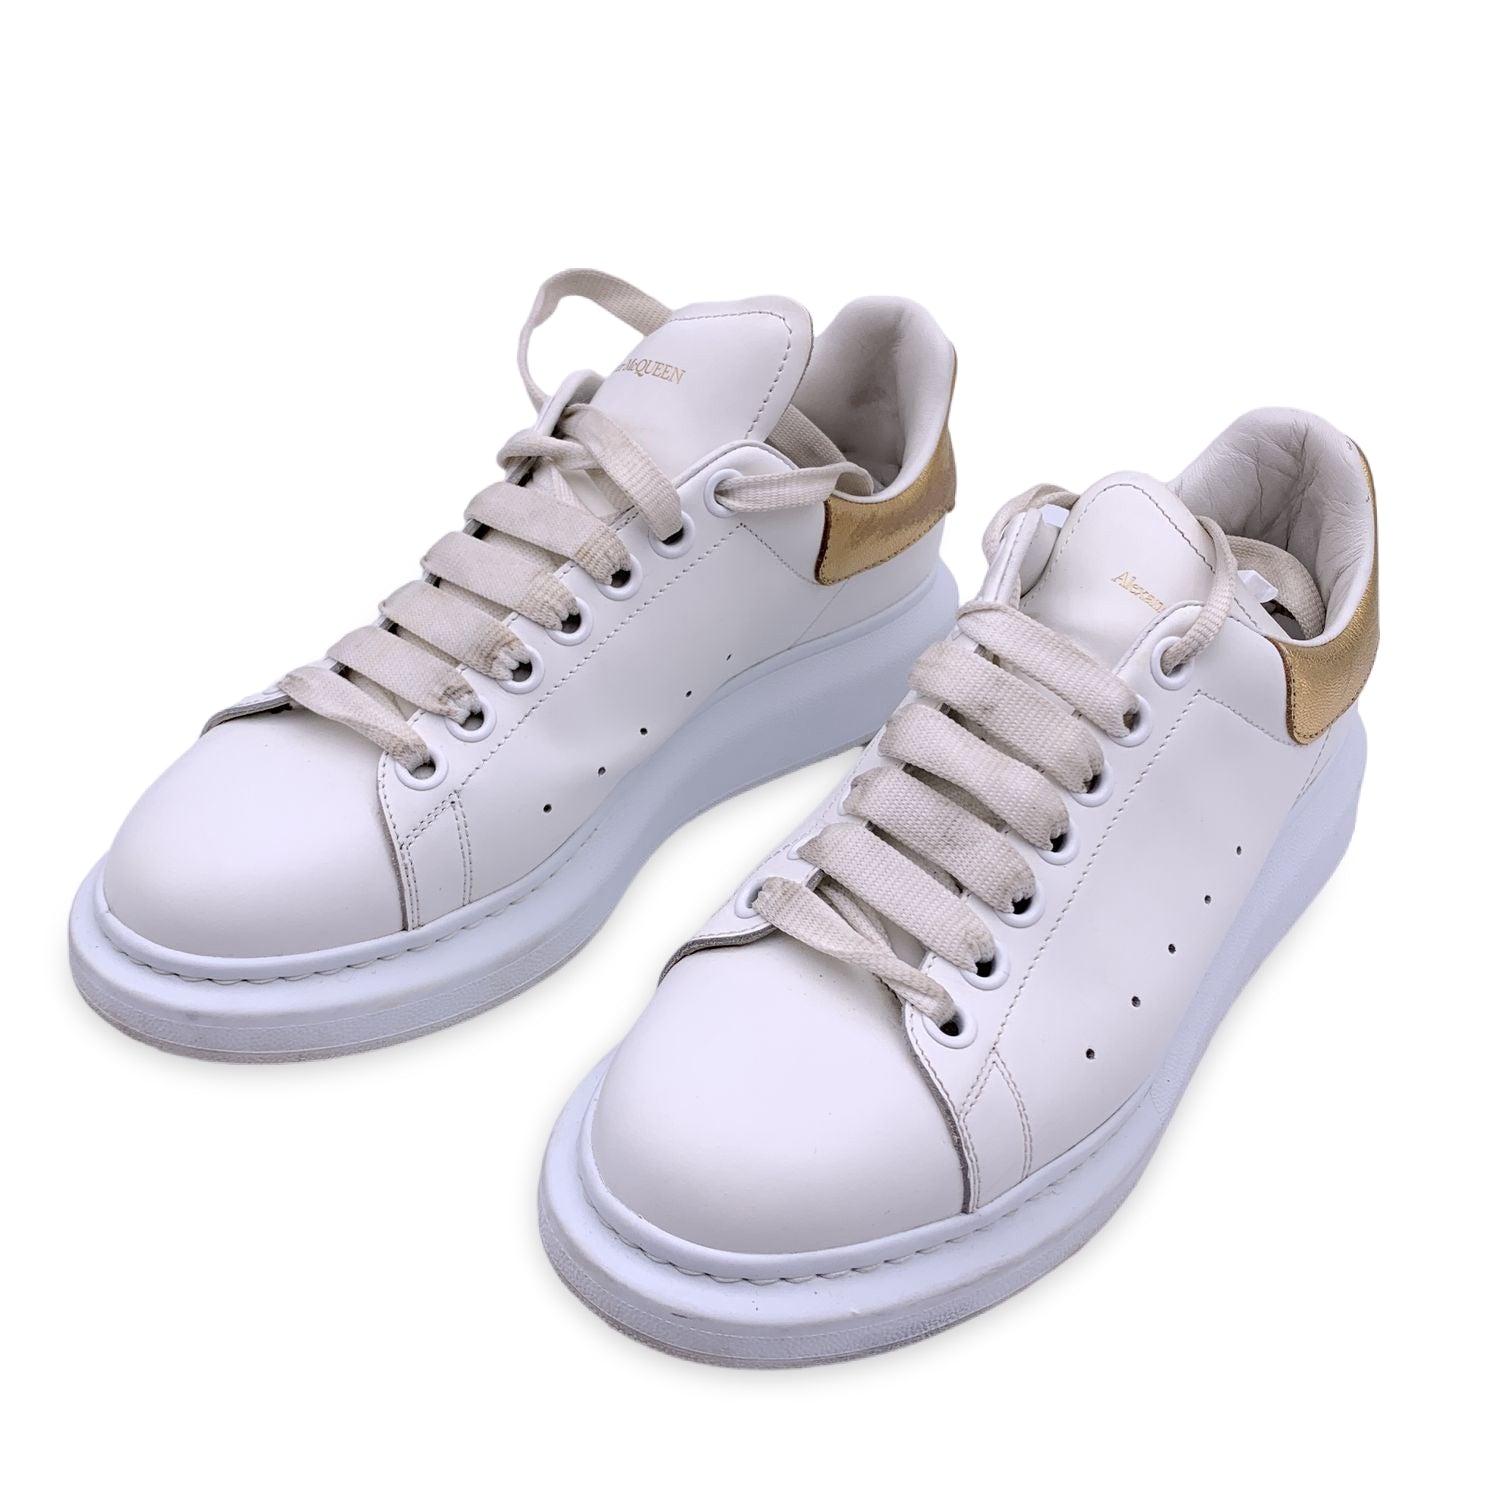 Alexander McQueen White and Gold Lace Up Sneakers Shoes Size 40 In Excellent Condition In Rome, Rome